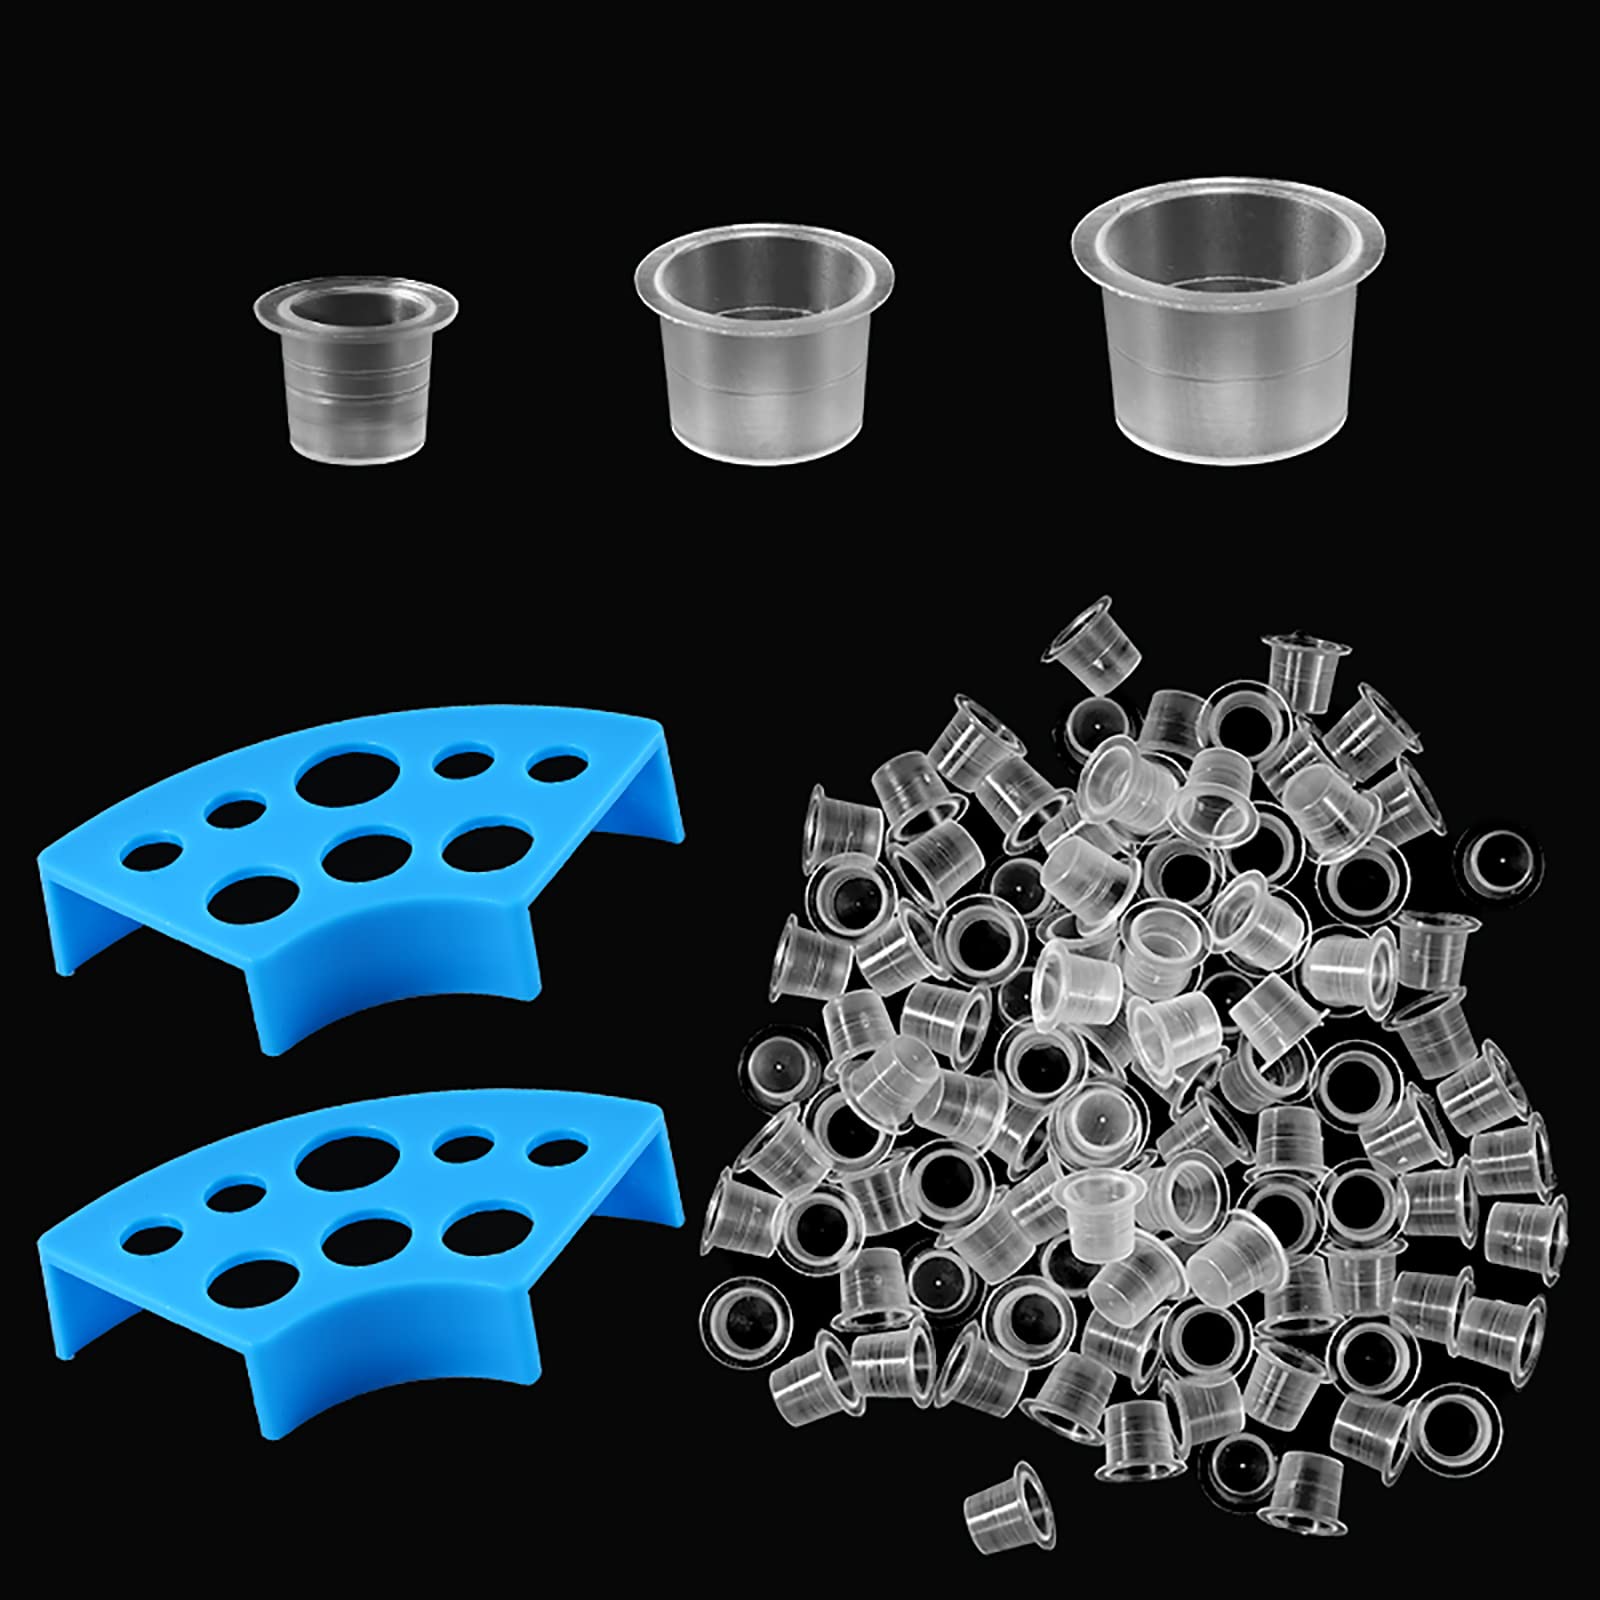 300Pcs Tattoo Ink Caps with 2 Cups Holders - 300Pcs Mix Sizes Disposable Tattoo Ink Cups for Pigment Tattoo Kit, Tattoo Supplies, Tattoo Accessory (#9mm, 13mm, 15mm)